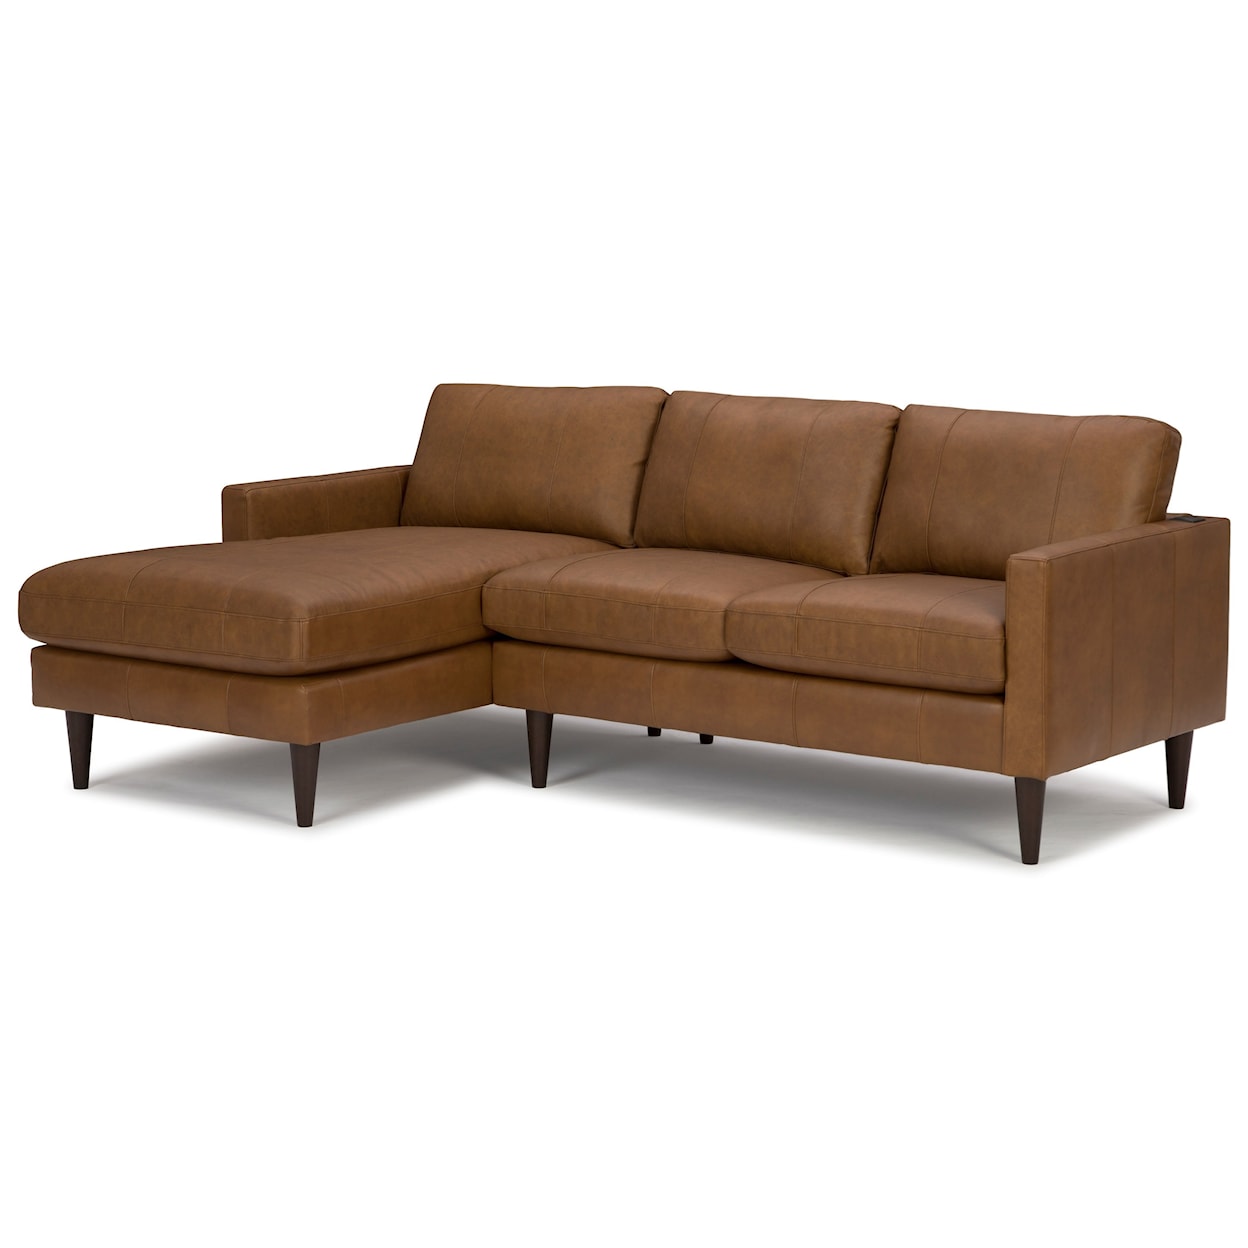 Bravo Furniture Trafton Chaise Sofa with LAF Chaise